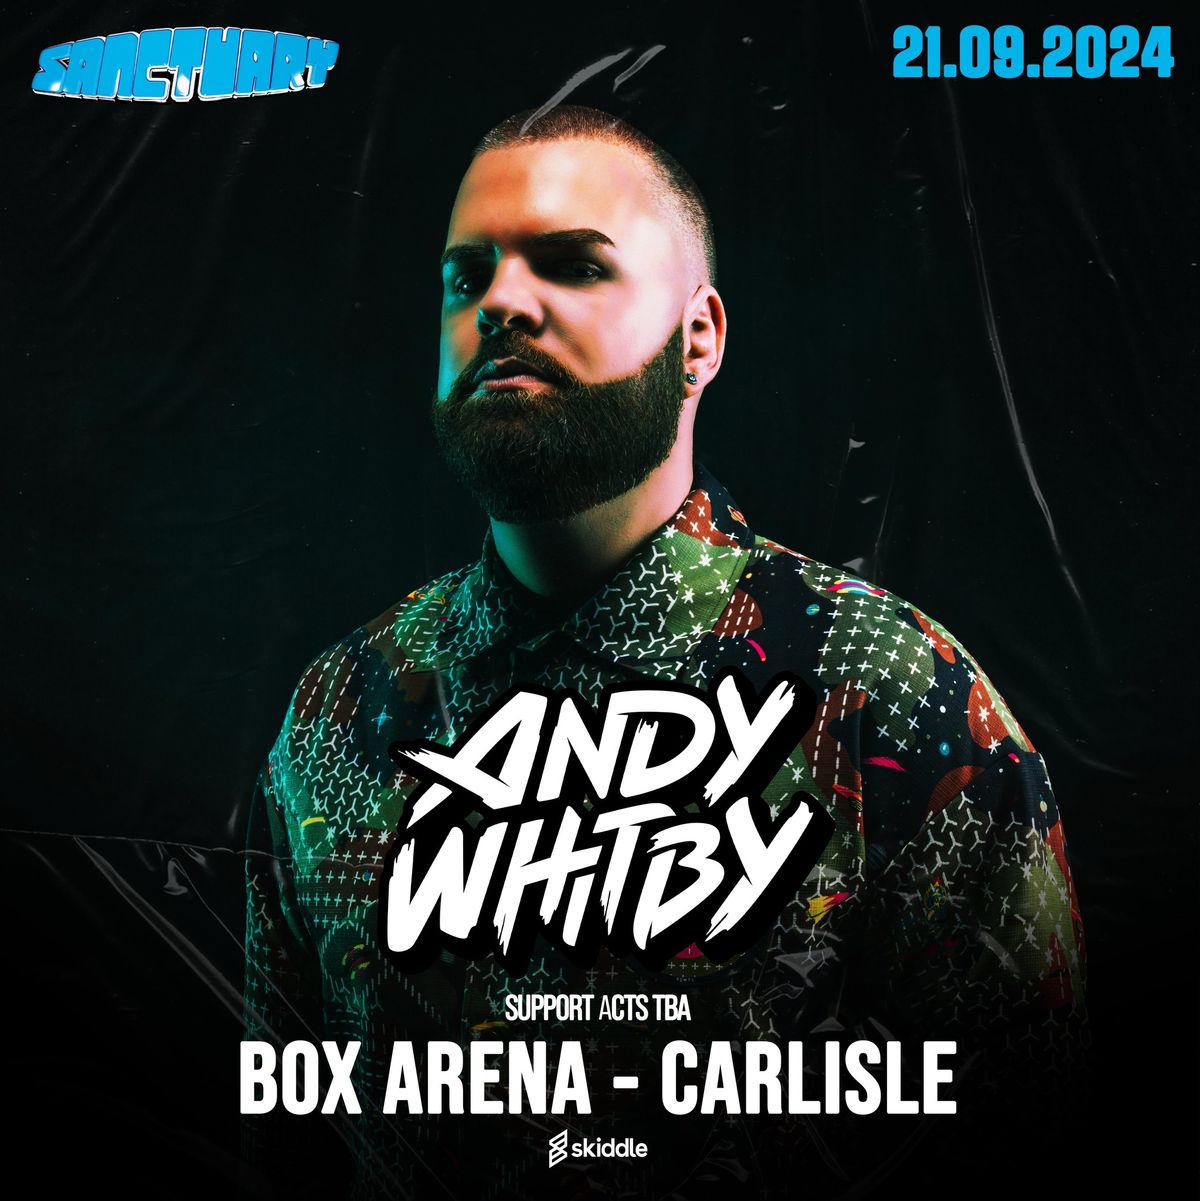 ANDY WHITBY at BOX ARENA , Carlisle IAW SANCTUARY 